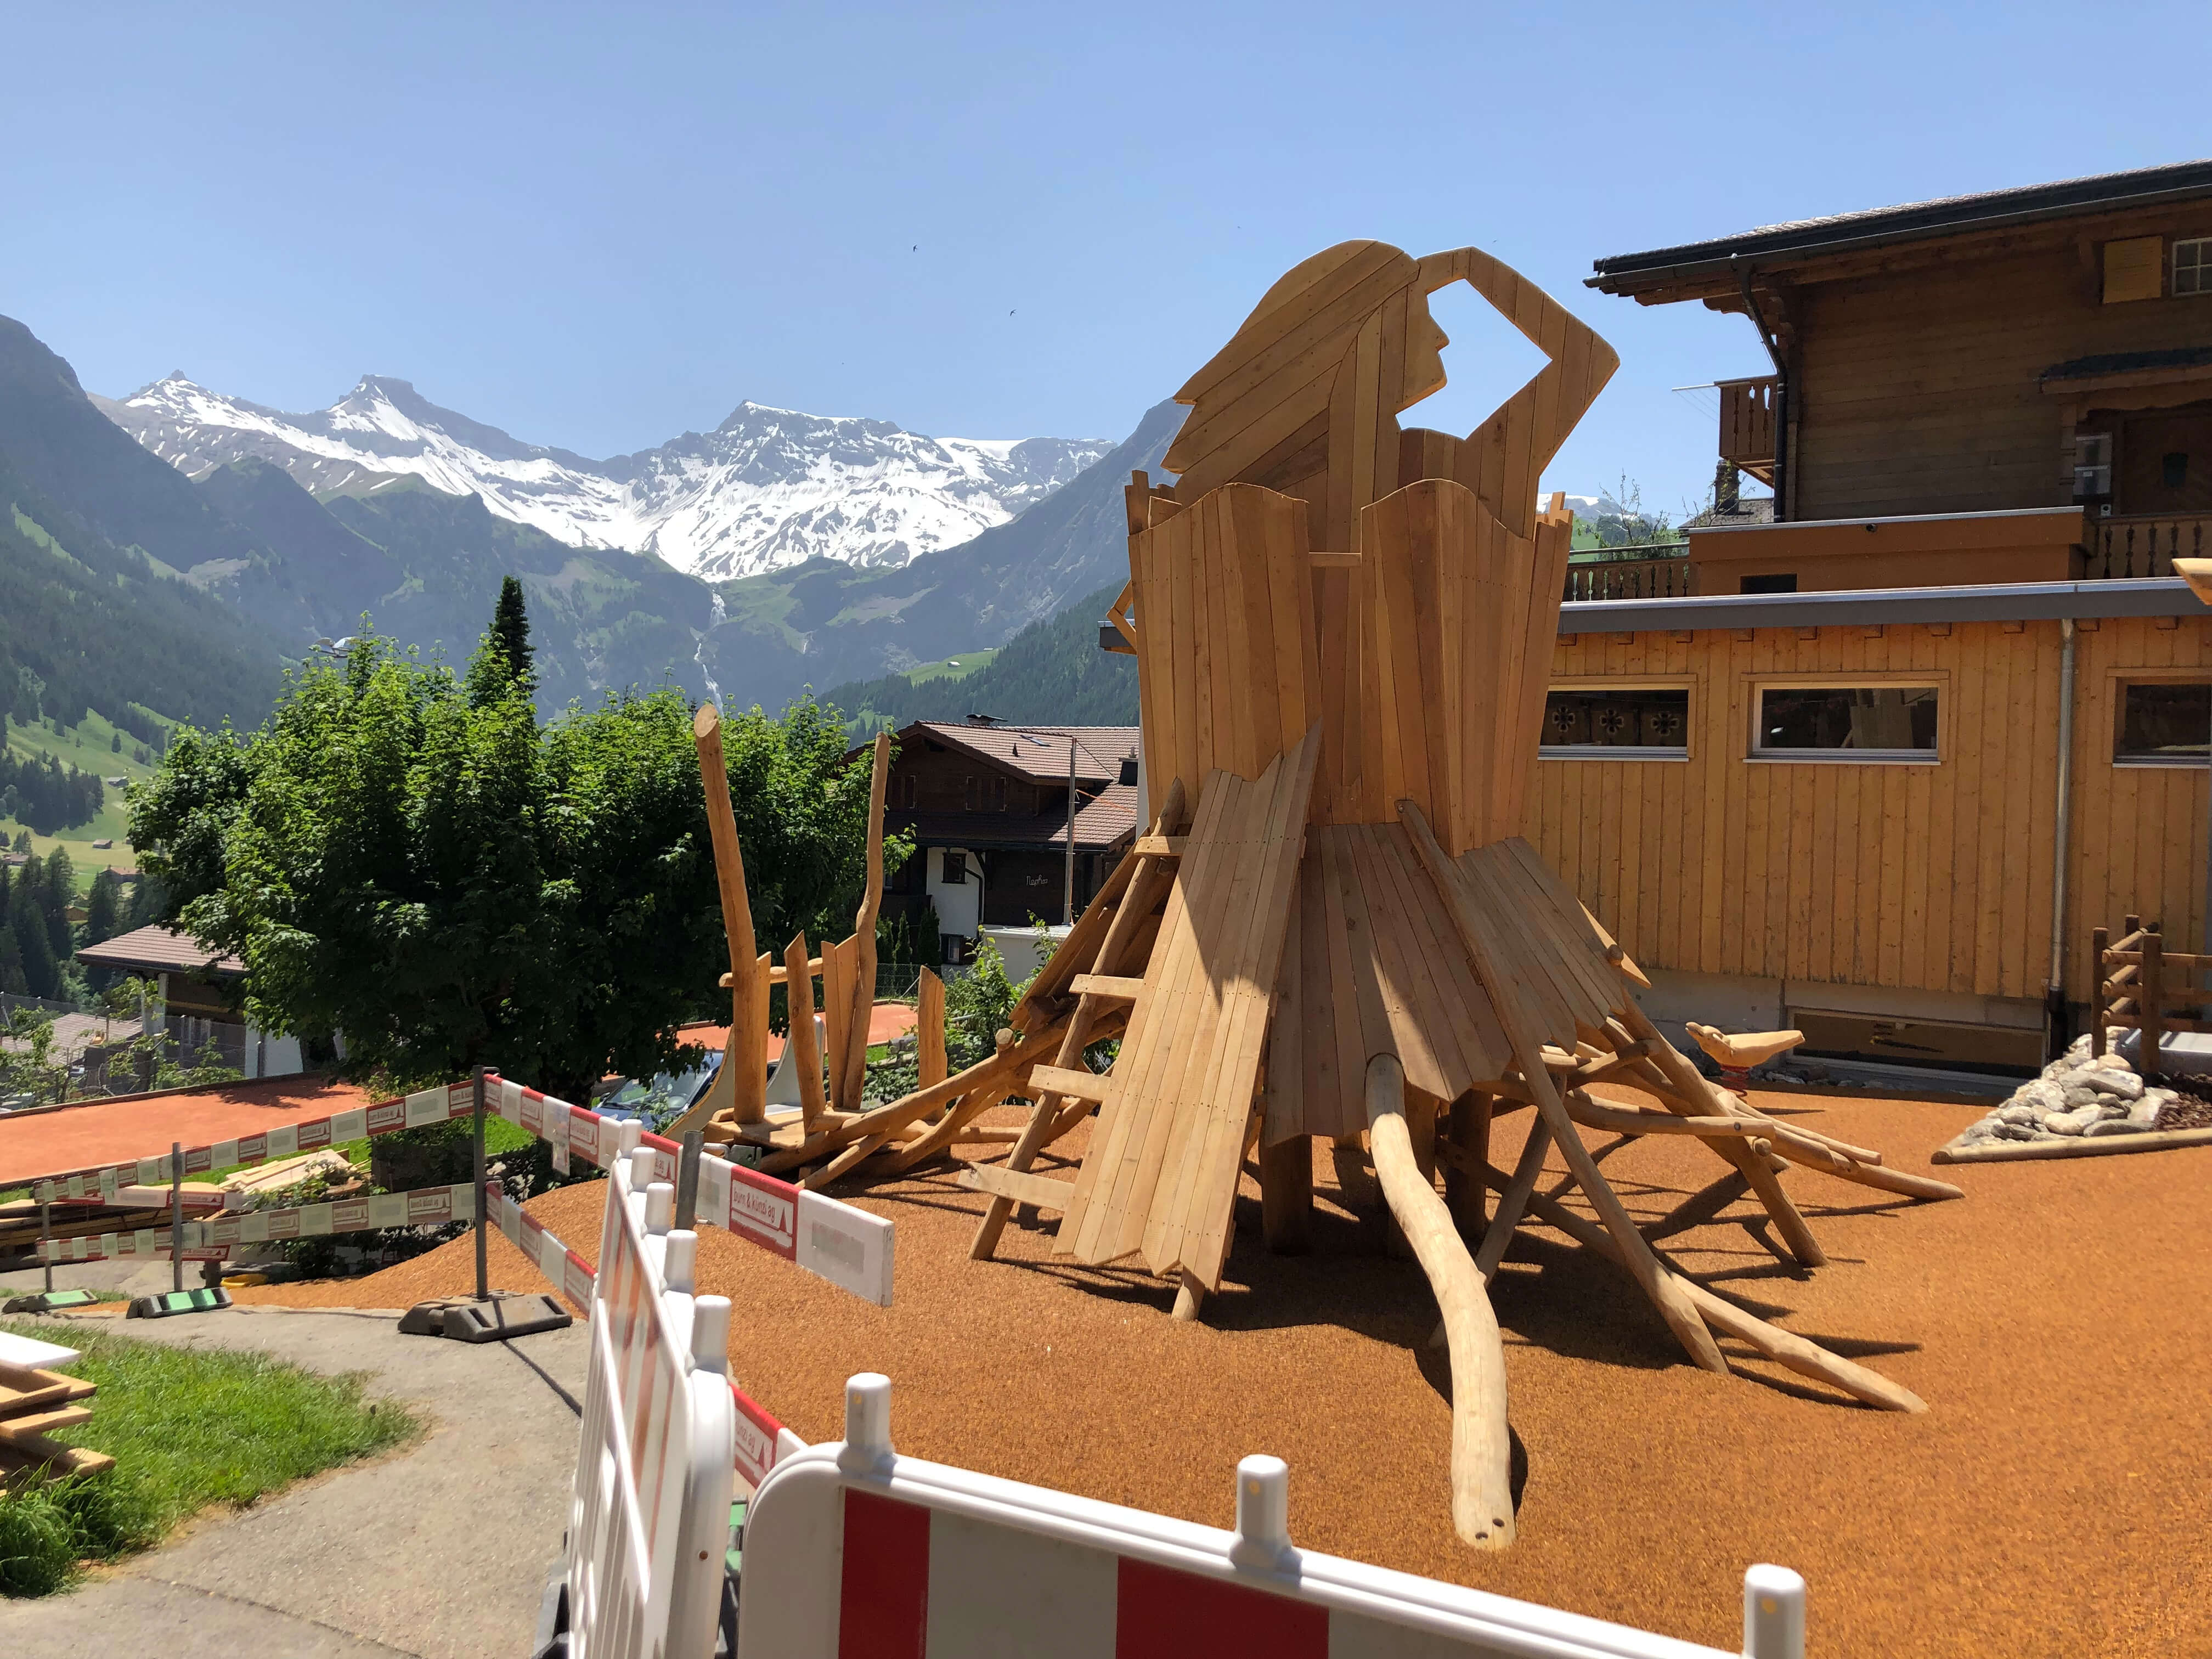 Wooden artwork with a view of mountains